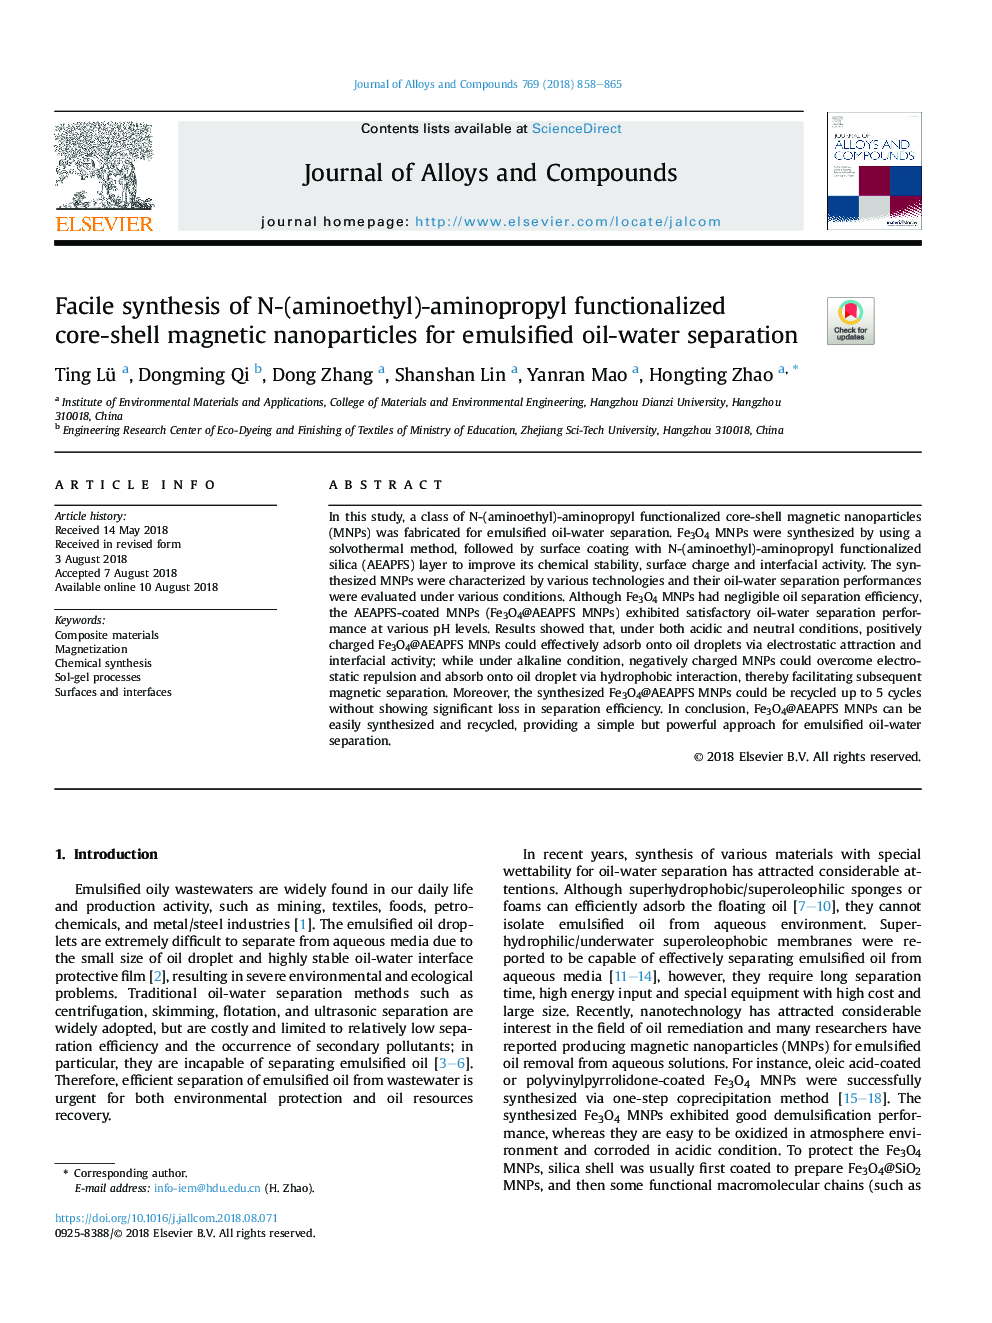 Facile synthesis of N-(aminoethyl)-aminopropyl functionalized core-shell magnetic nanoparticles for emulsified oil-water separation